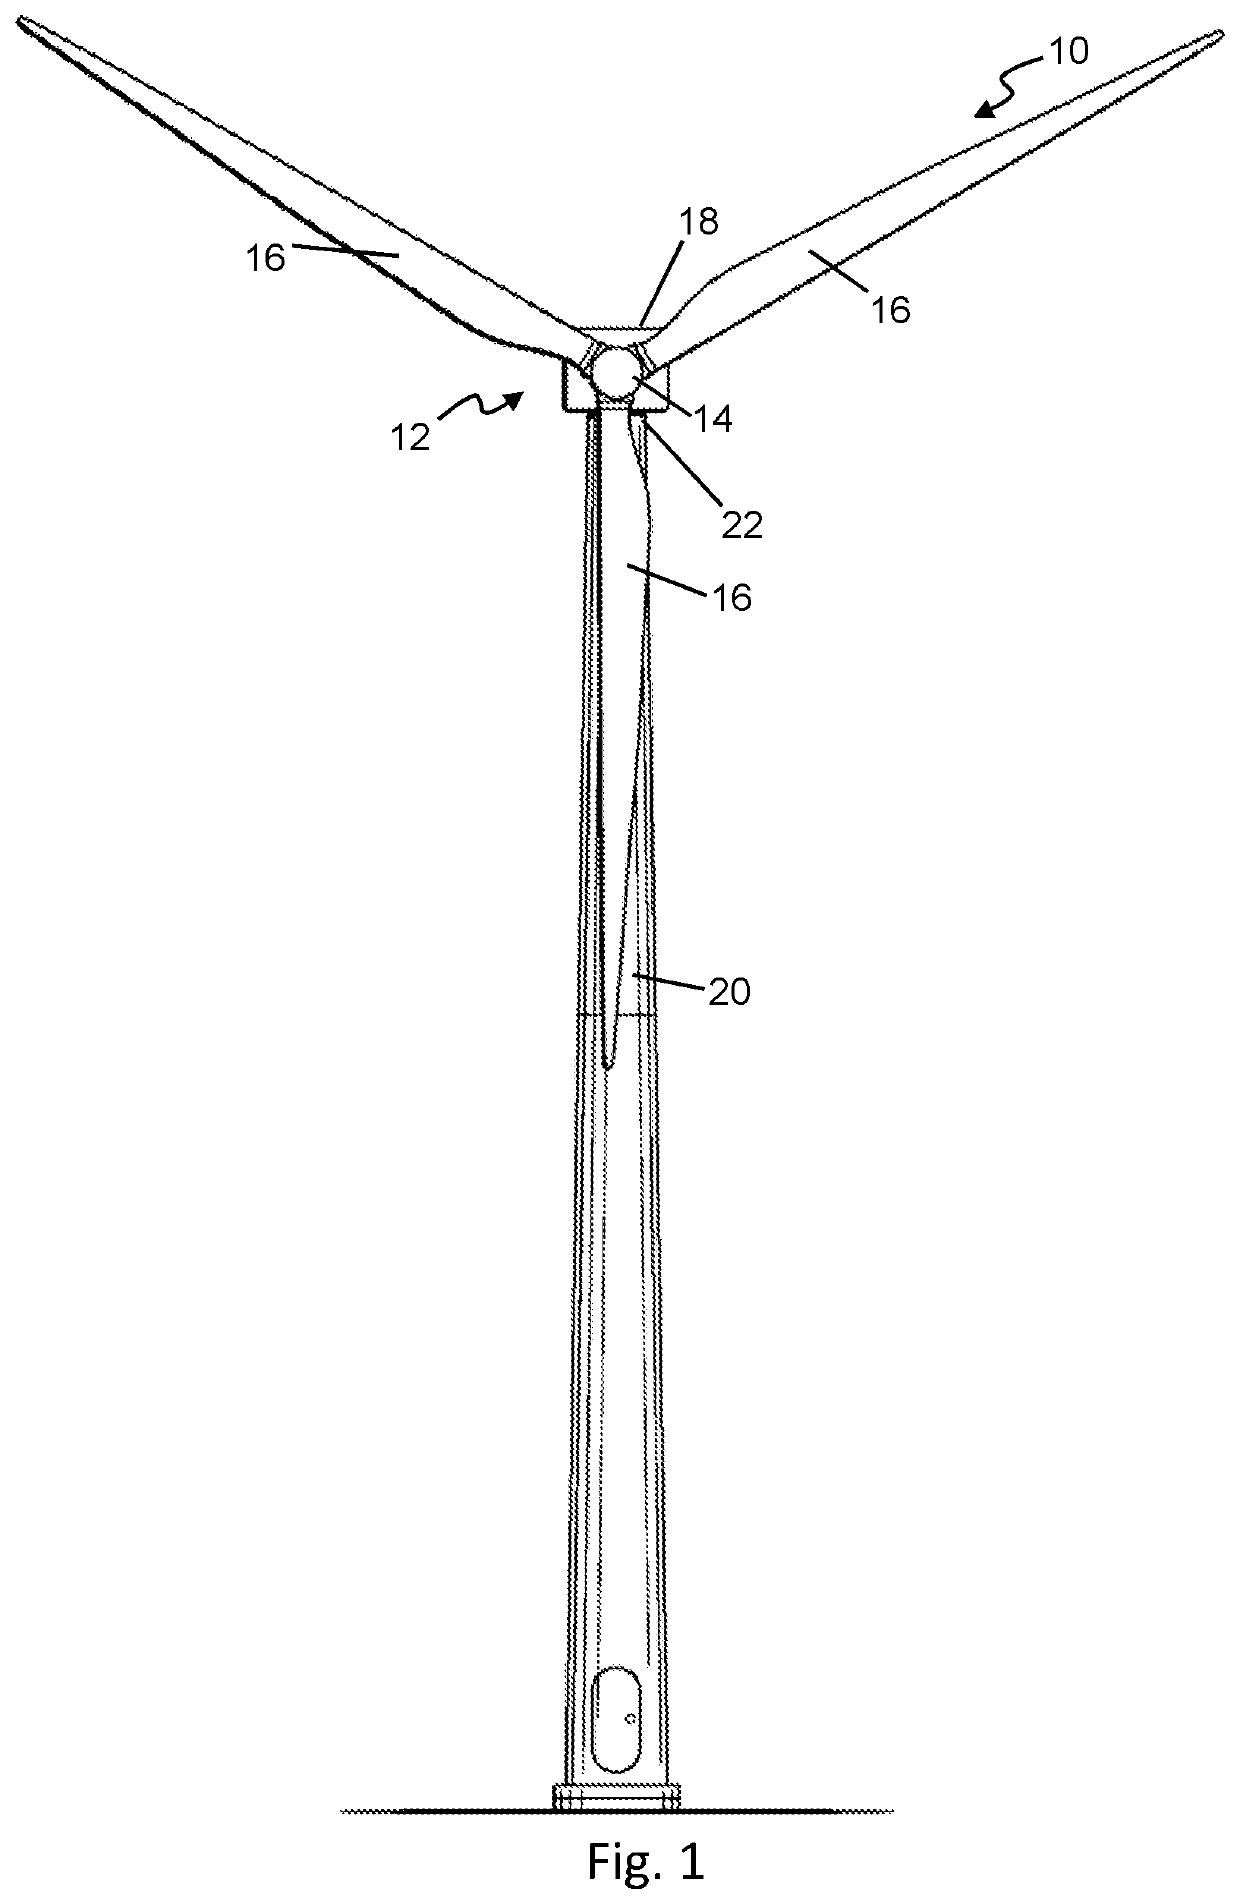 Wind turbine yaw control system with improved wind direction tracking